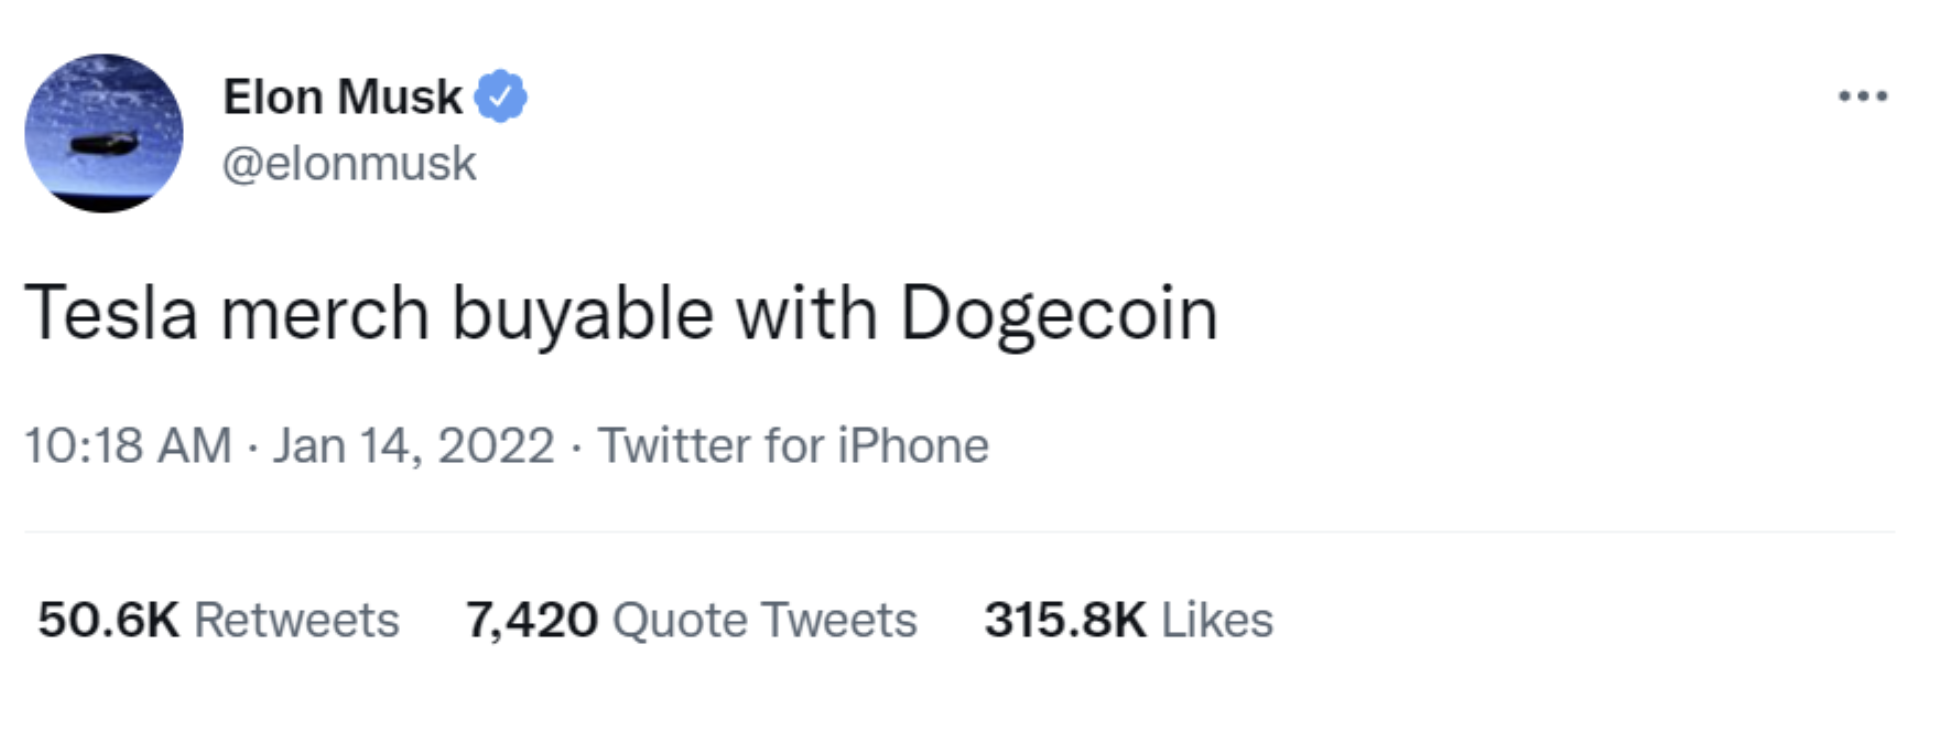 Tweet from CEO, Elon Musk, confirming Tesla merchandise could be purchased with Dogecoin